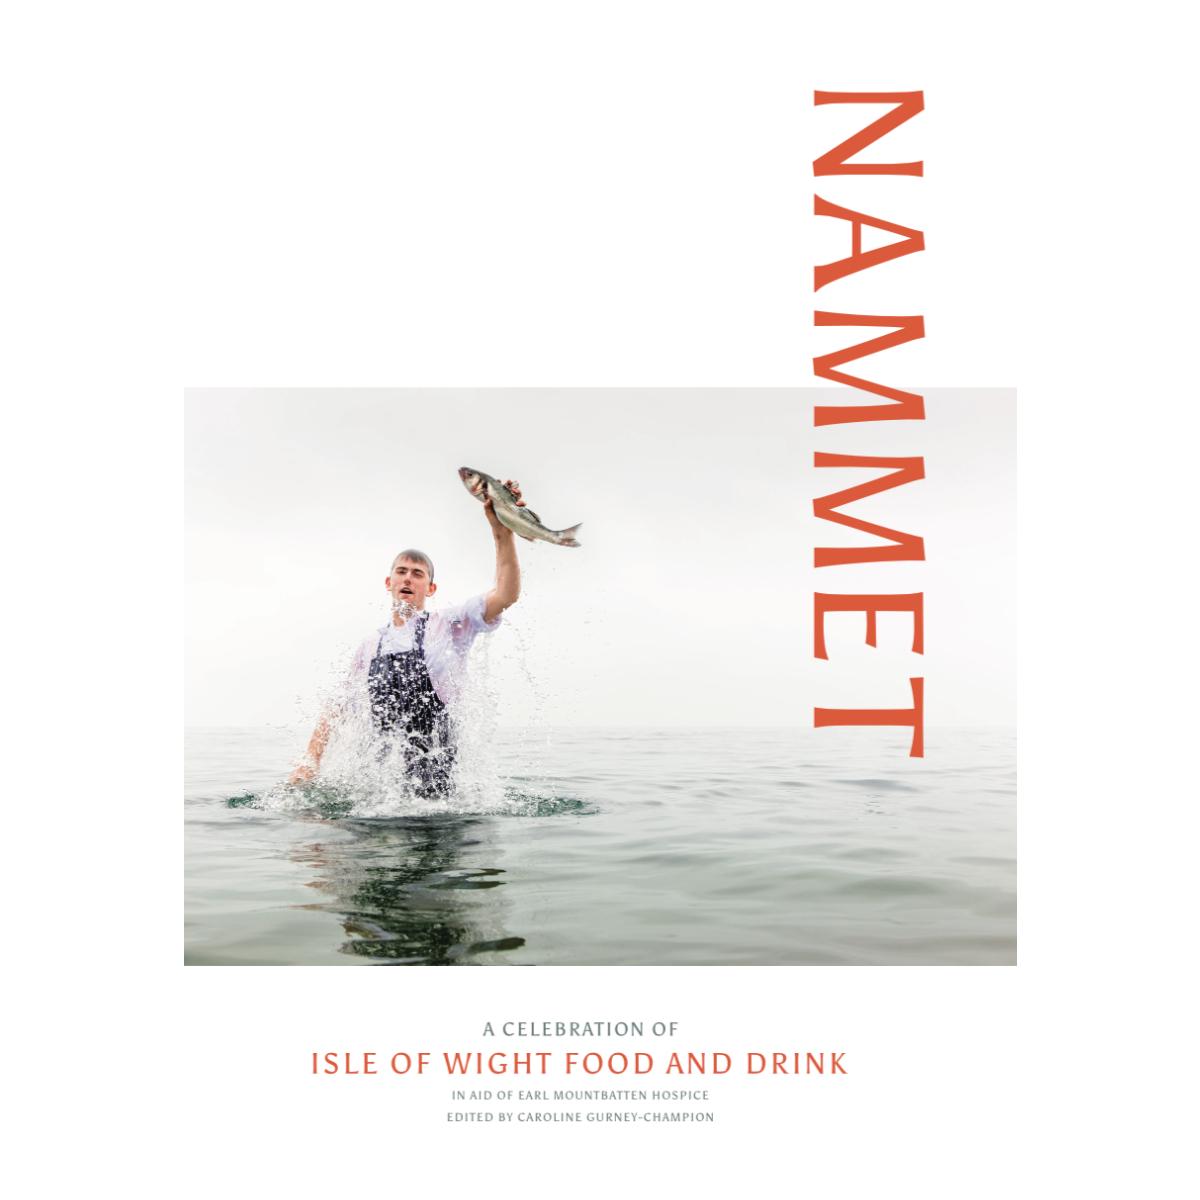 Nammet: A Celebration of Isle of Wight Food and Drink